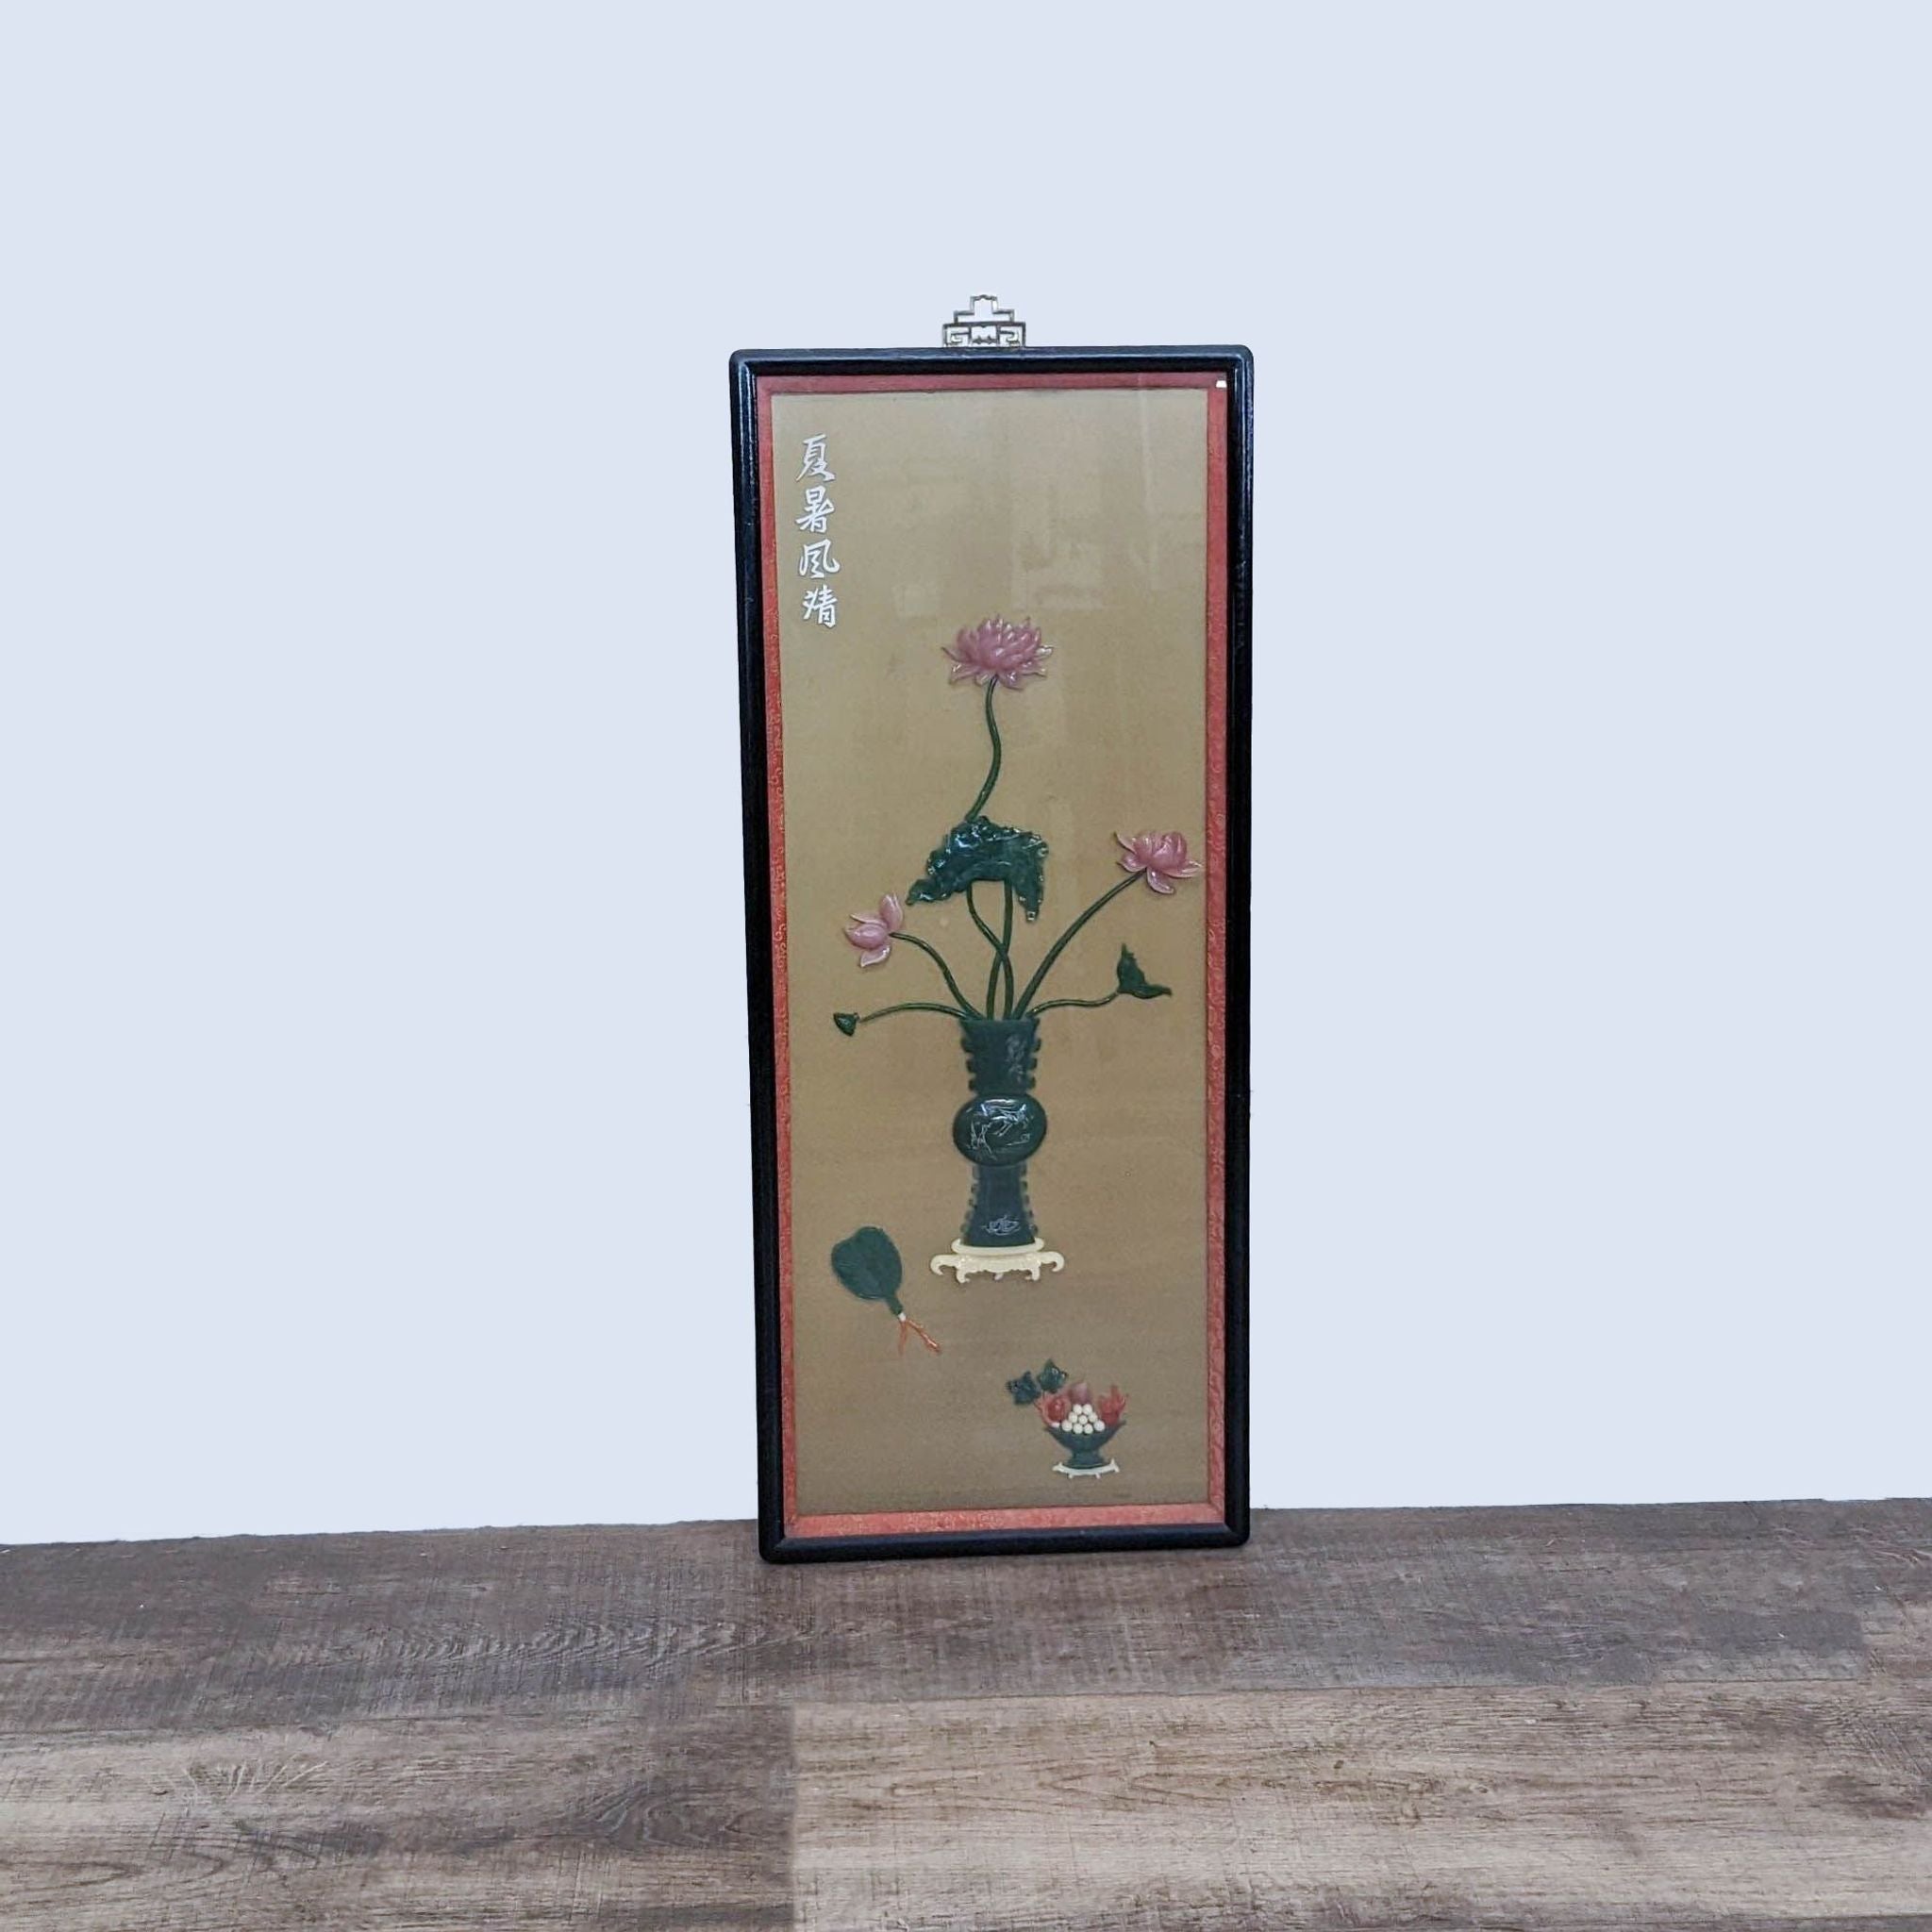 Alt text 1: Vertical Reperch artwork displaying a floral vase collage with jadeite and varied stones on a wooden table.